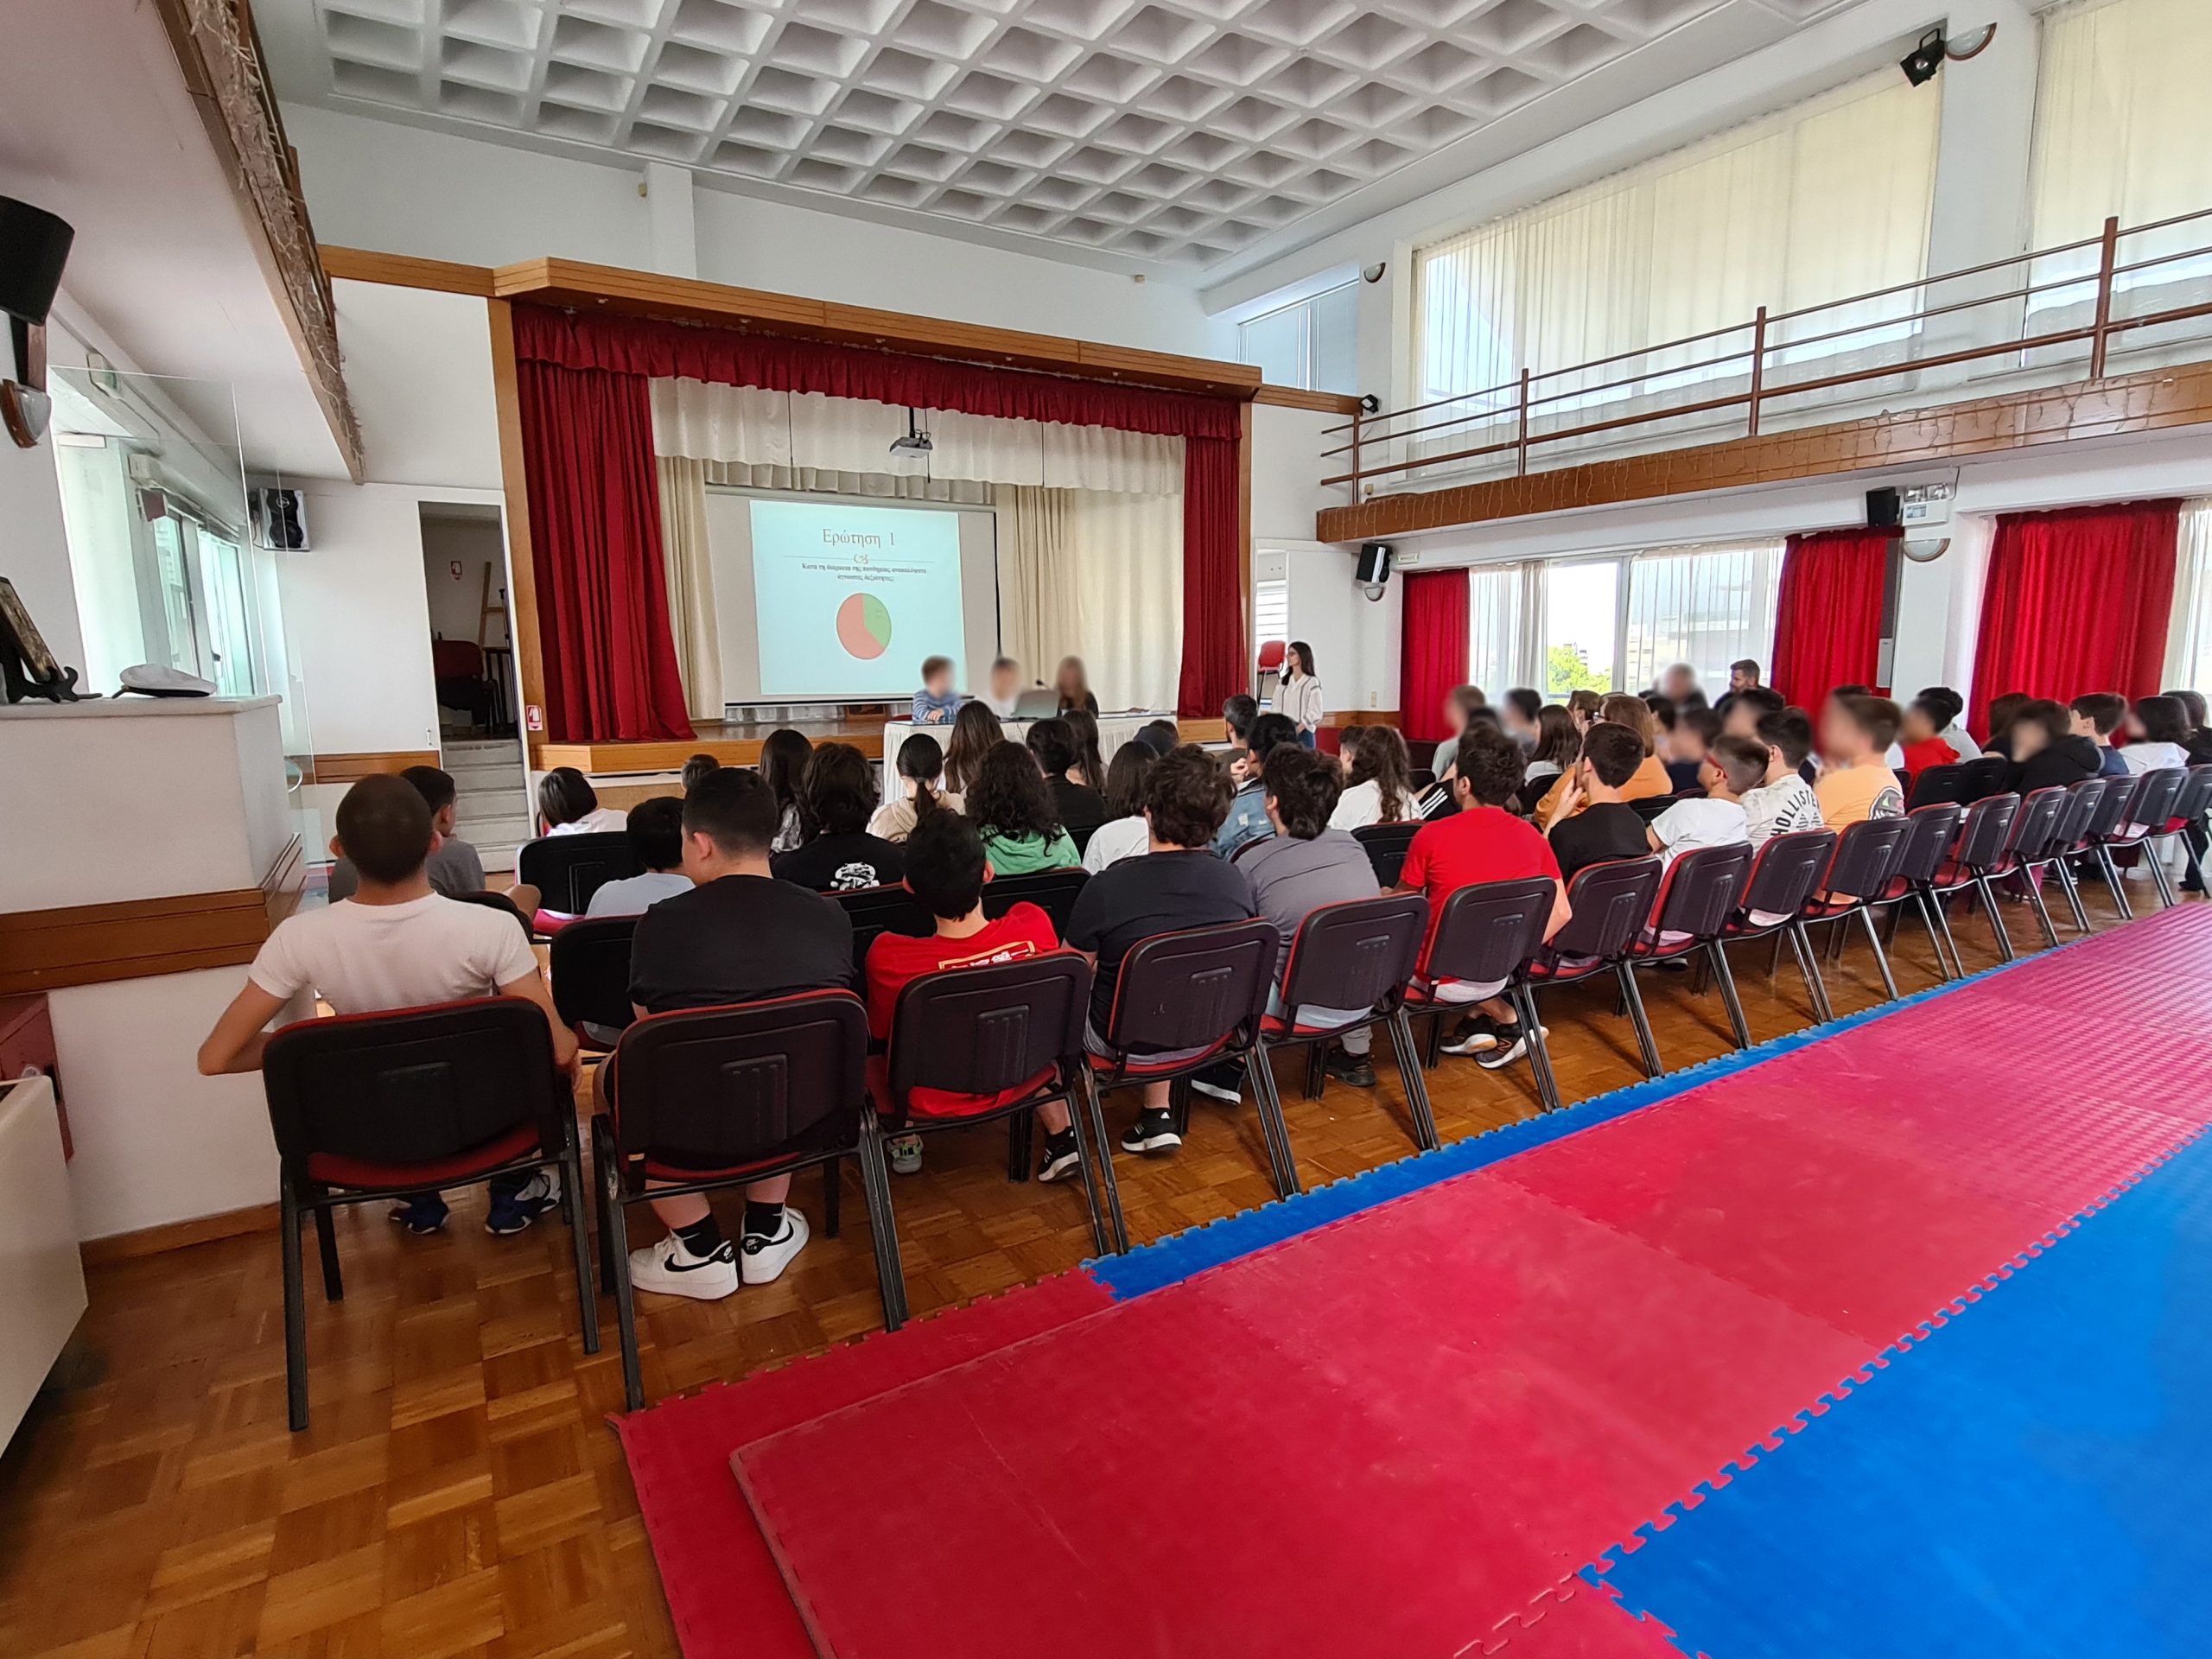 PAFSE at the Junior High School of Xenopoulos Schools in Greece